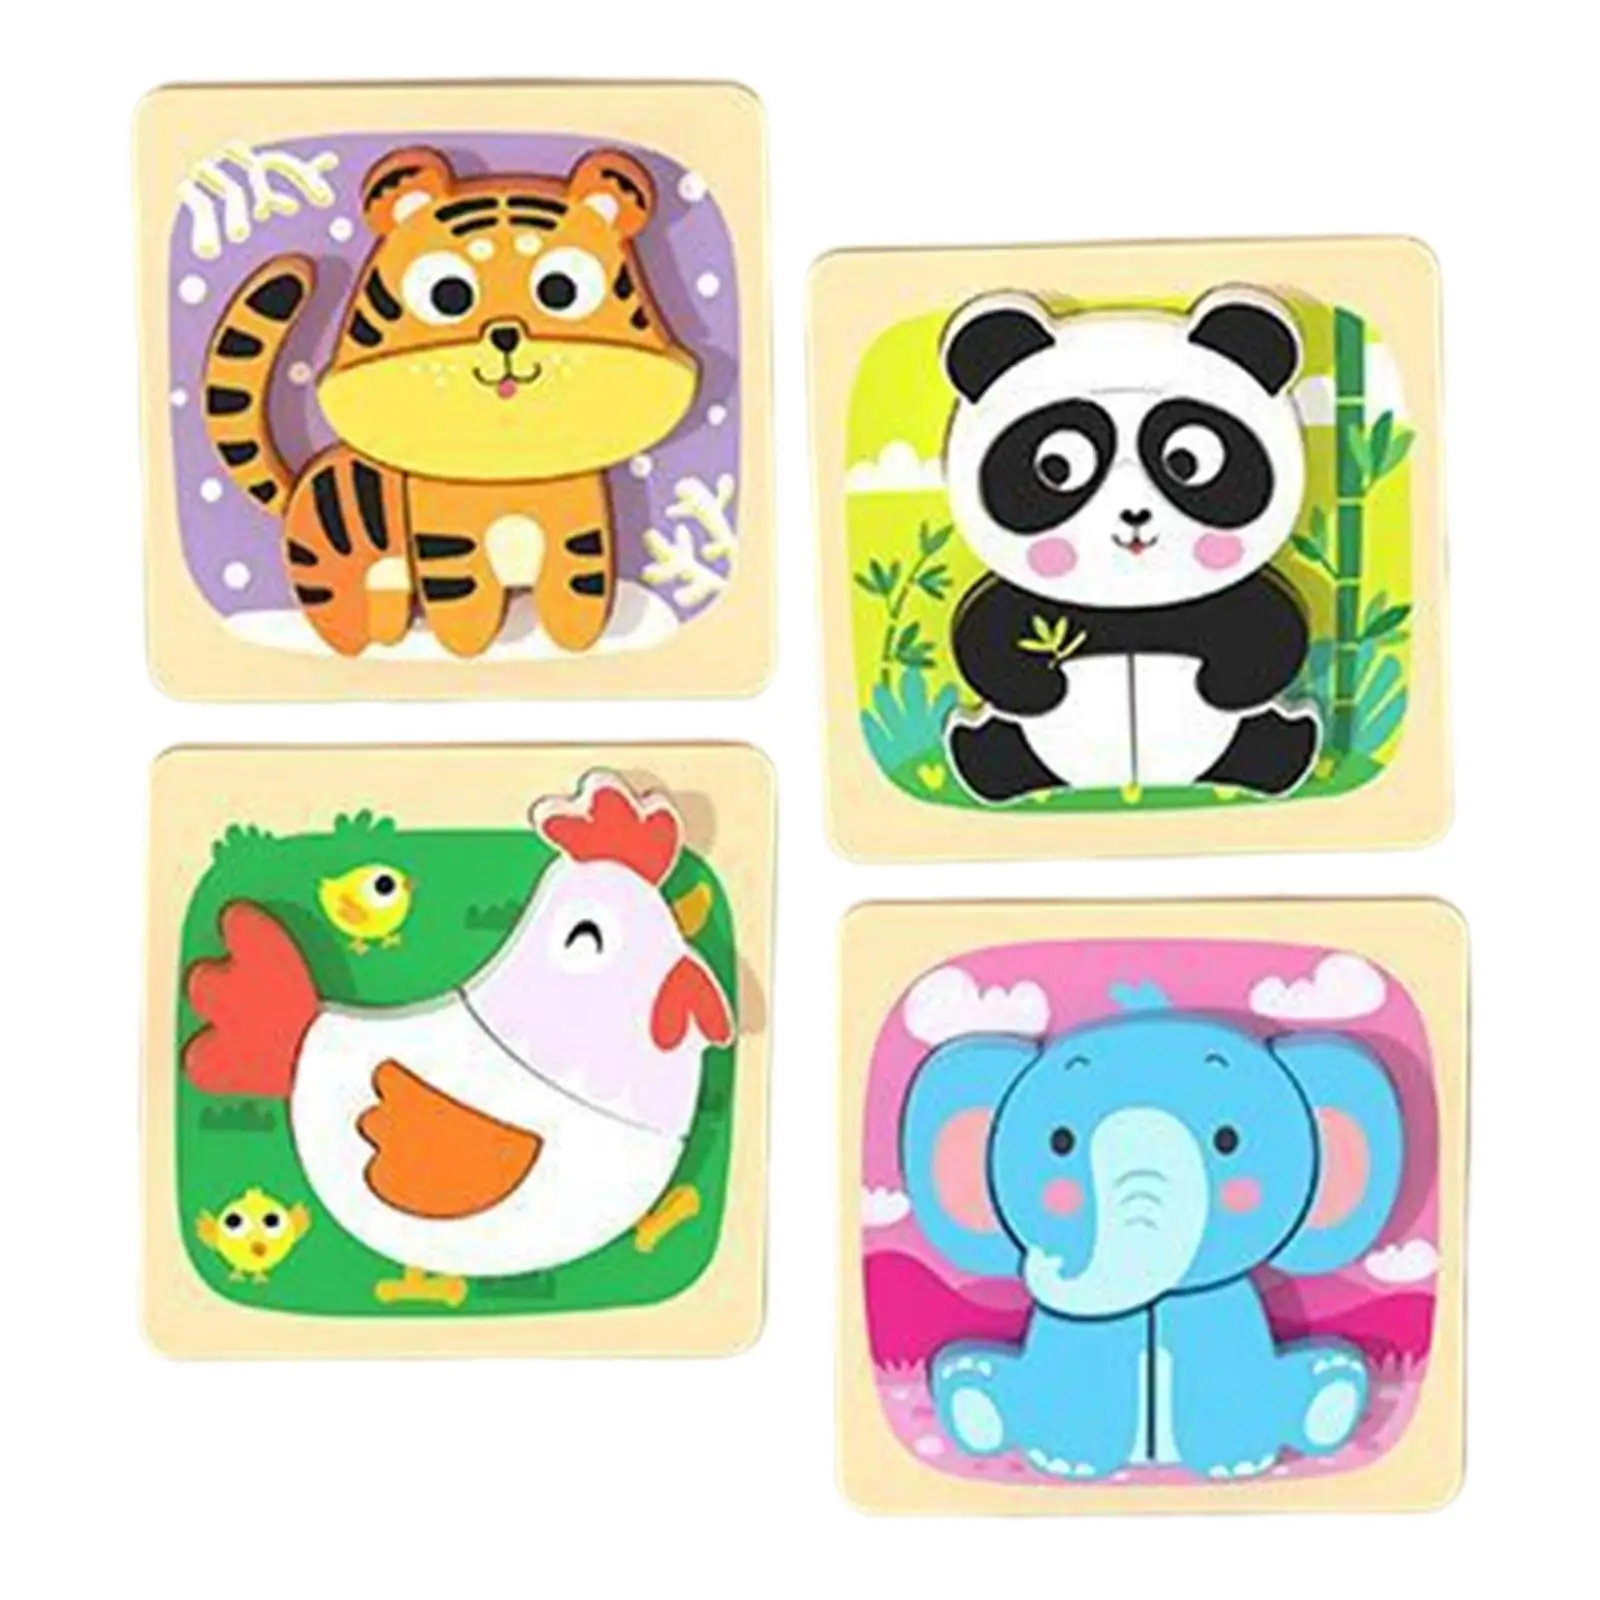 4x Wooden Animal Puzzles with 4 Animal Models Developmental Toy Wooden Crafts Animal Shaped Puzzles for Birthday Gifts